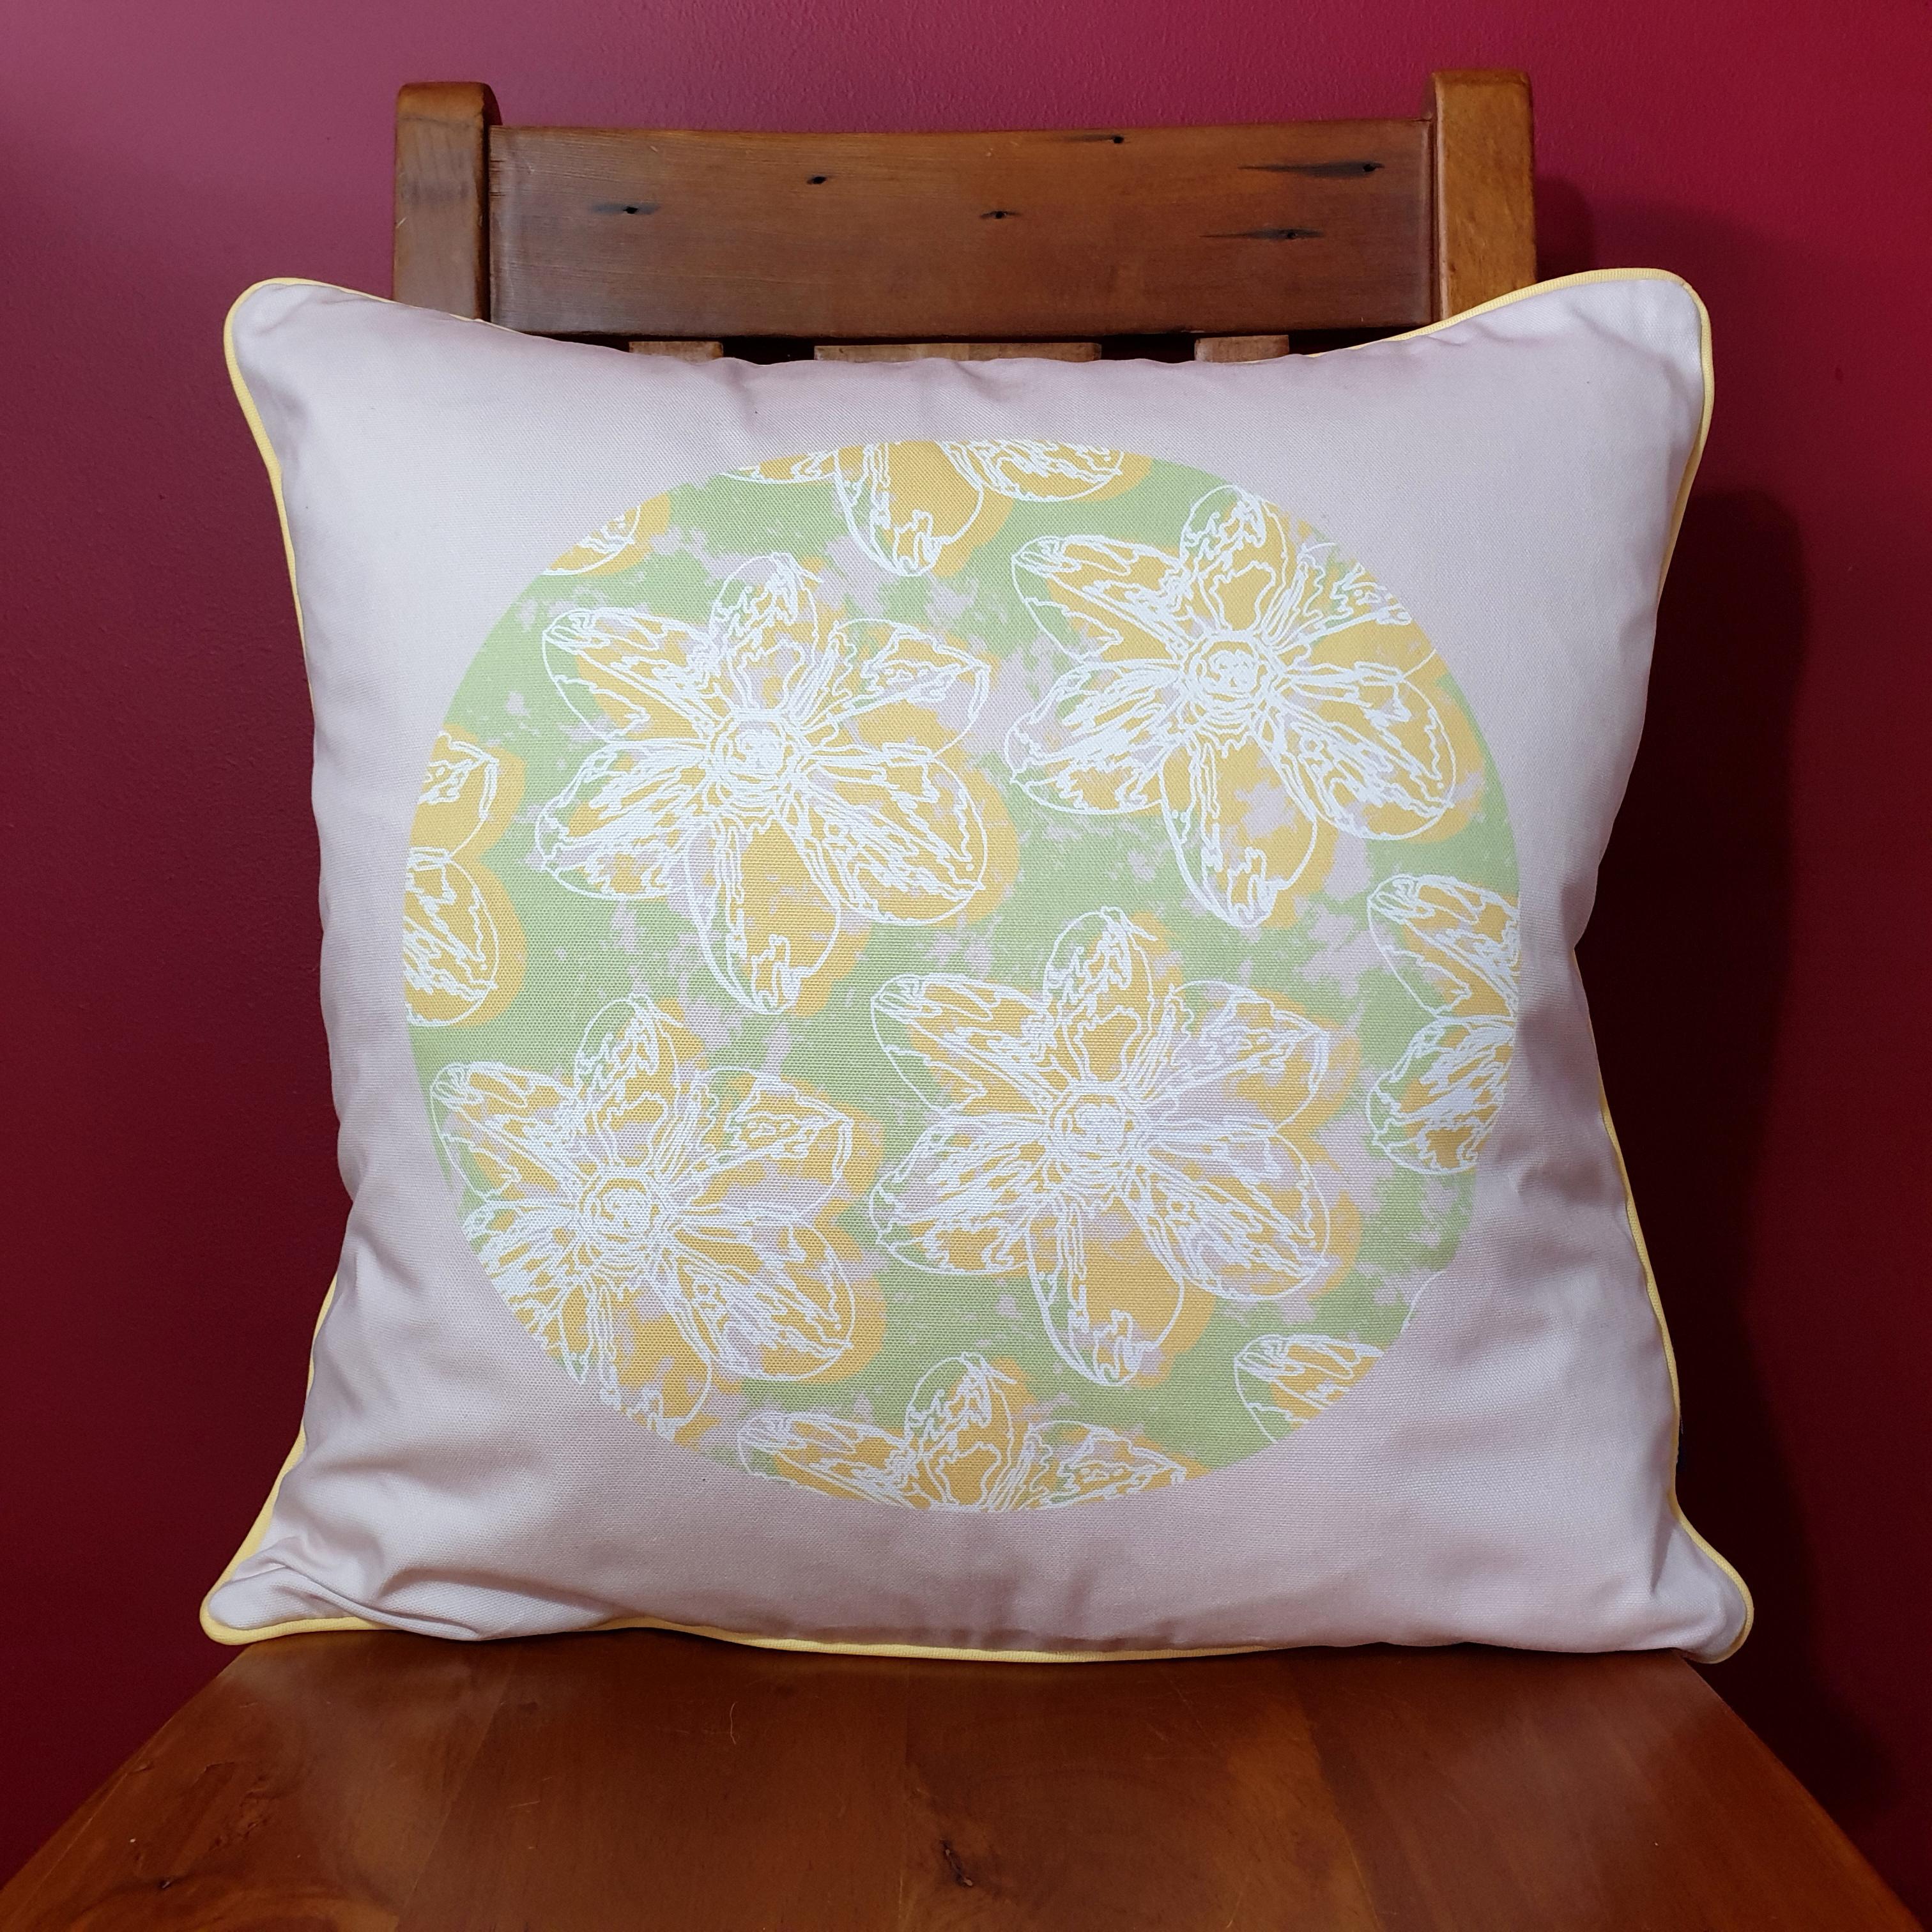 Double-sided 51cm square Flower Splash cushion designed by thetinkan. Yellow narcissus flower with white traced outline and yellow piping set in a mint green coloured circle with pale pink paint splashes and pale pink surround. Available with an optional luxury cushion inner pad. VIEW PRODUCT >>